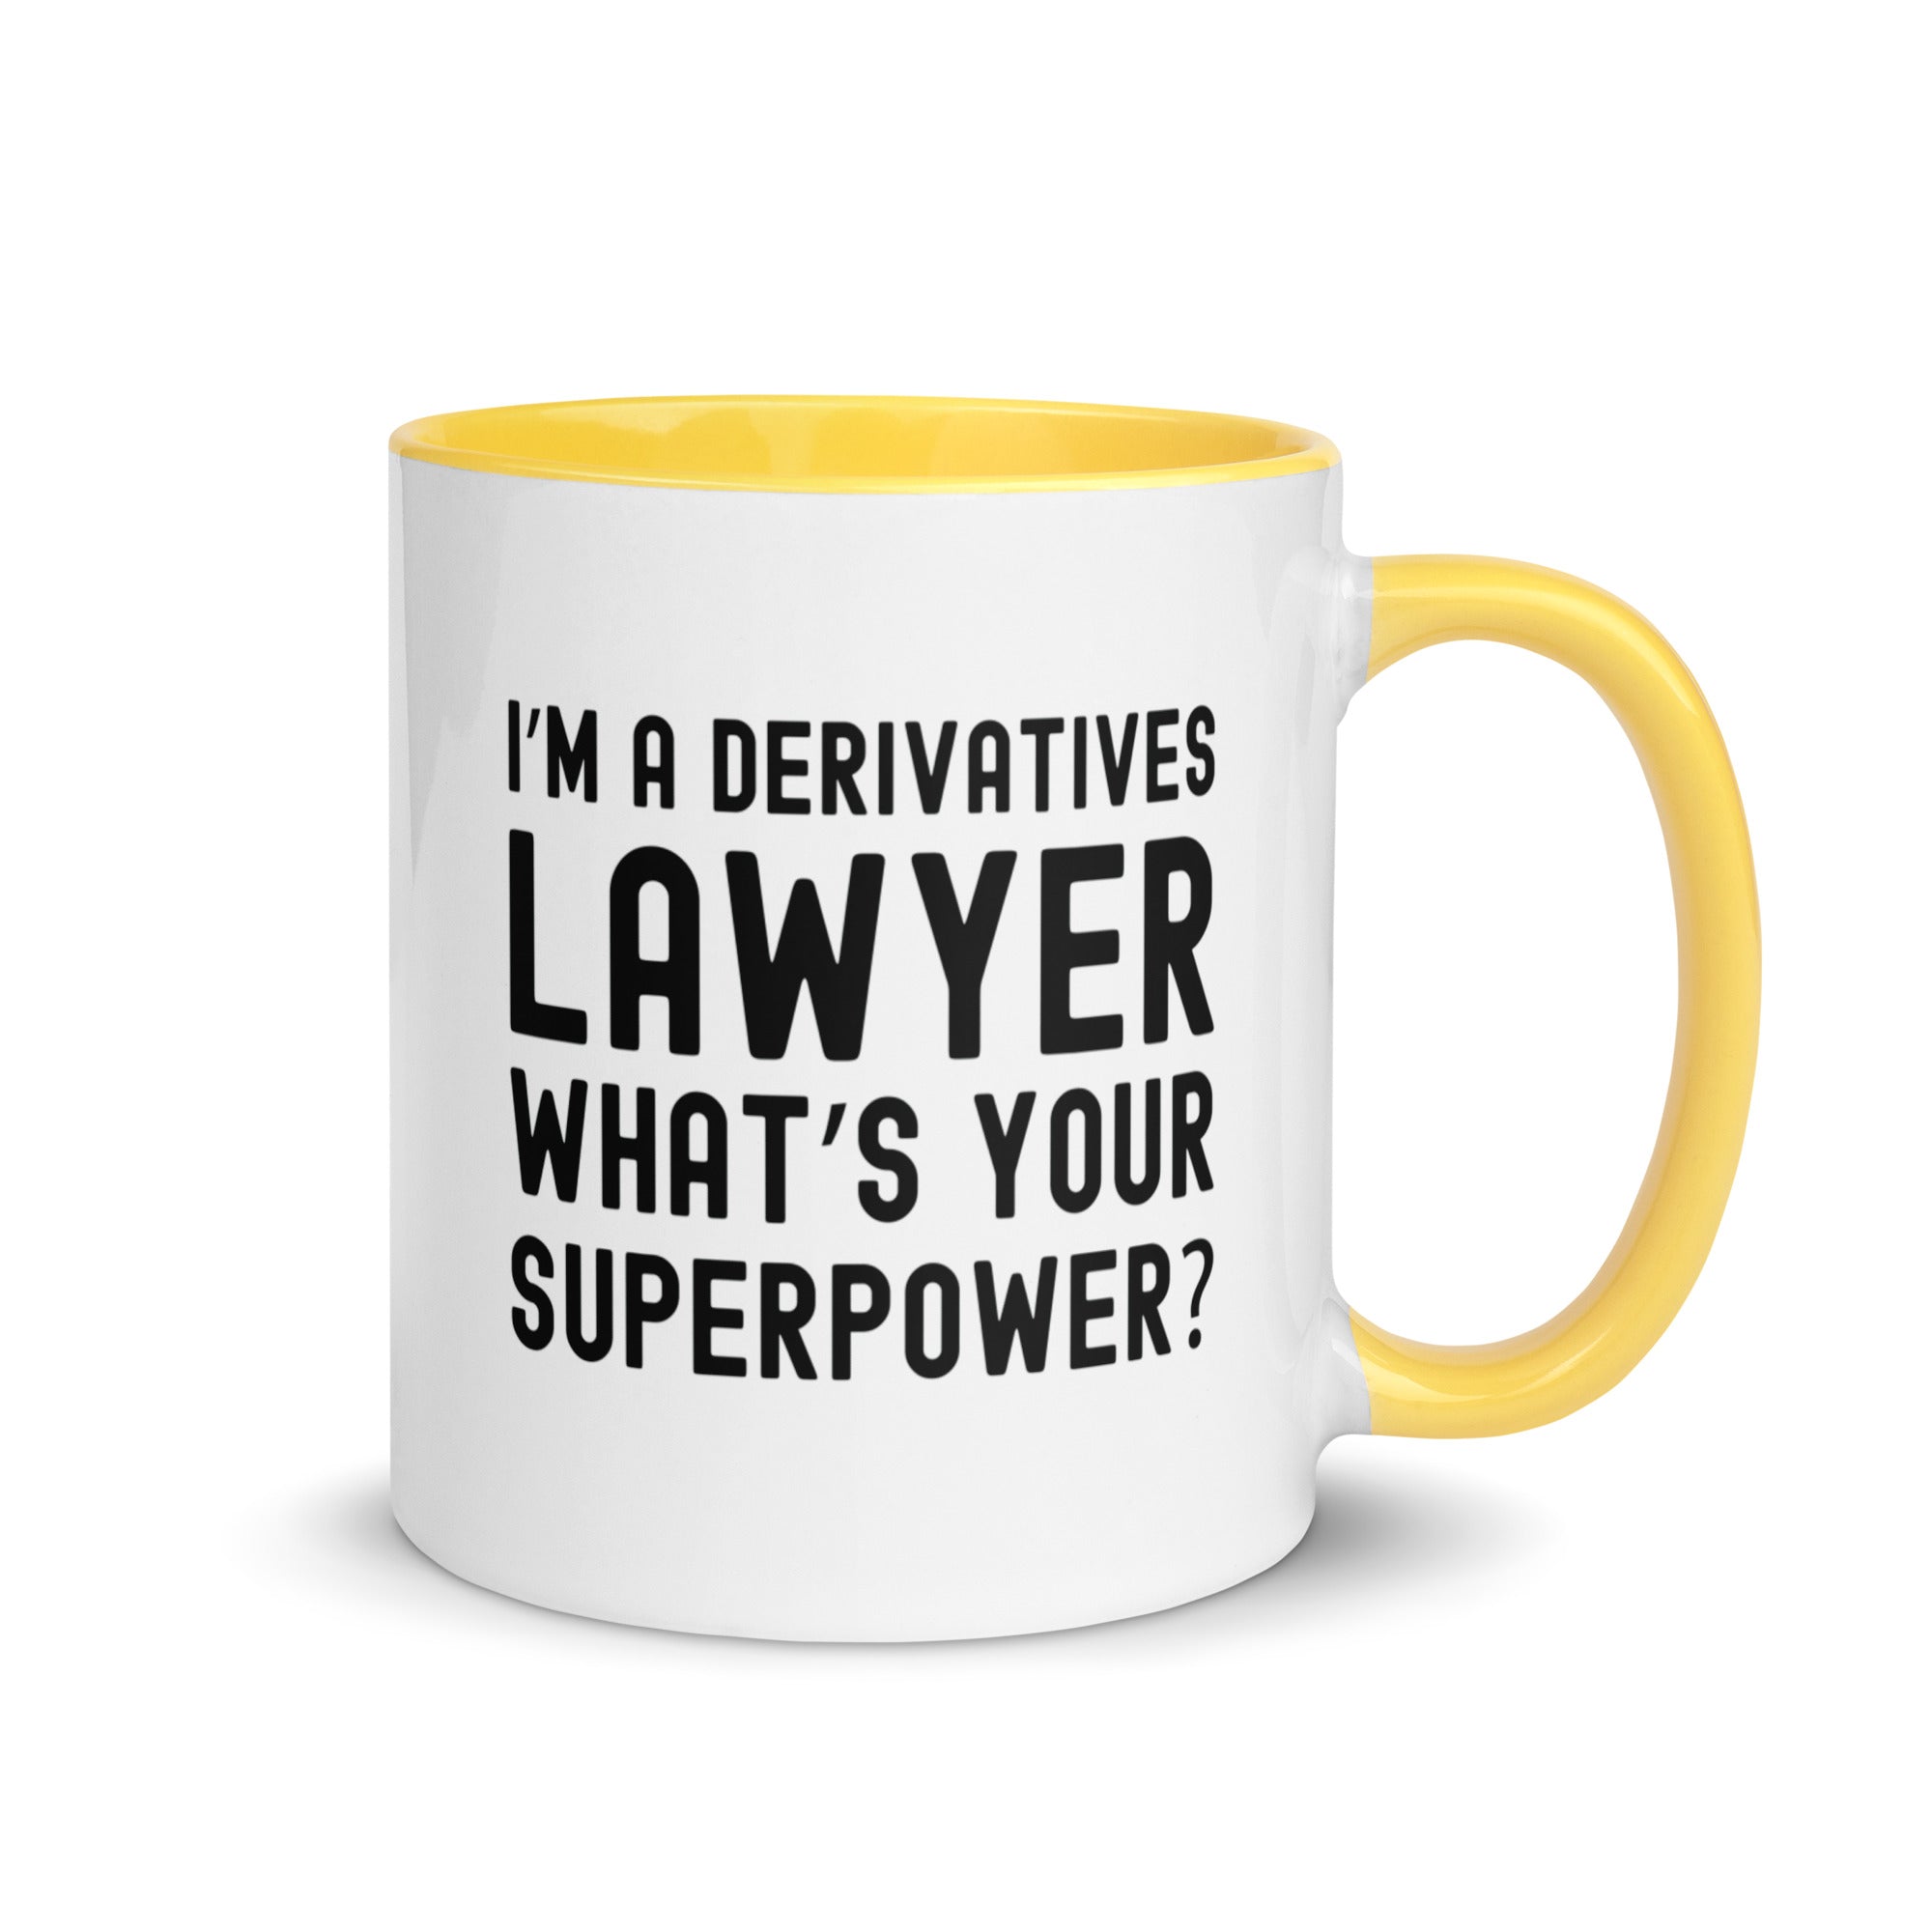 Mug with Color Inside | I’m a derivatives lawyer, what’s your superpower?